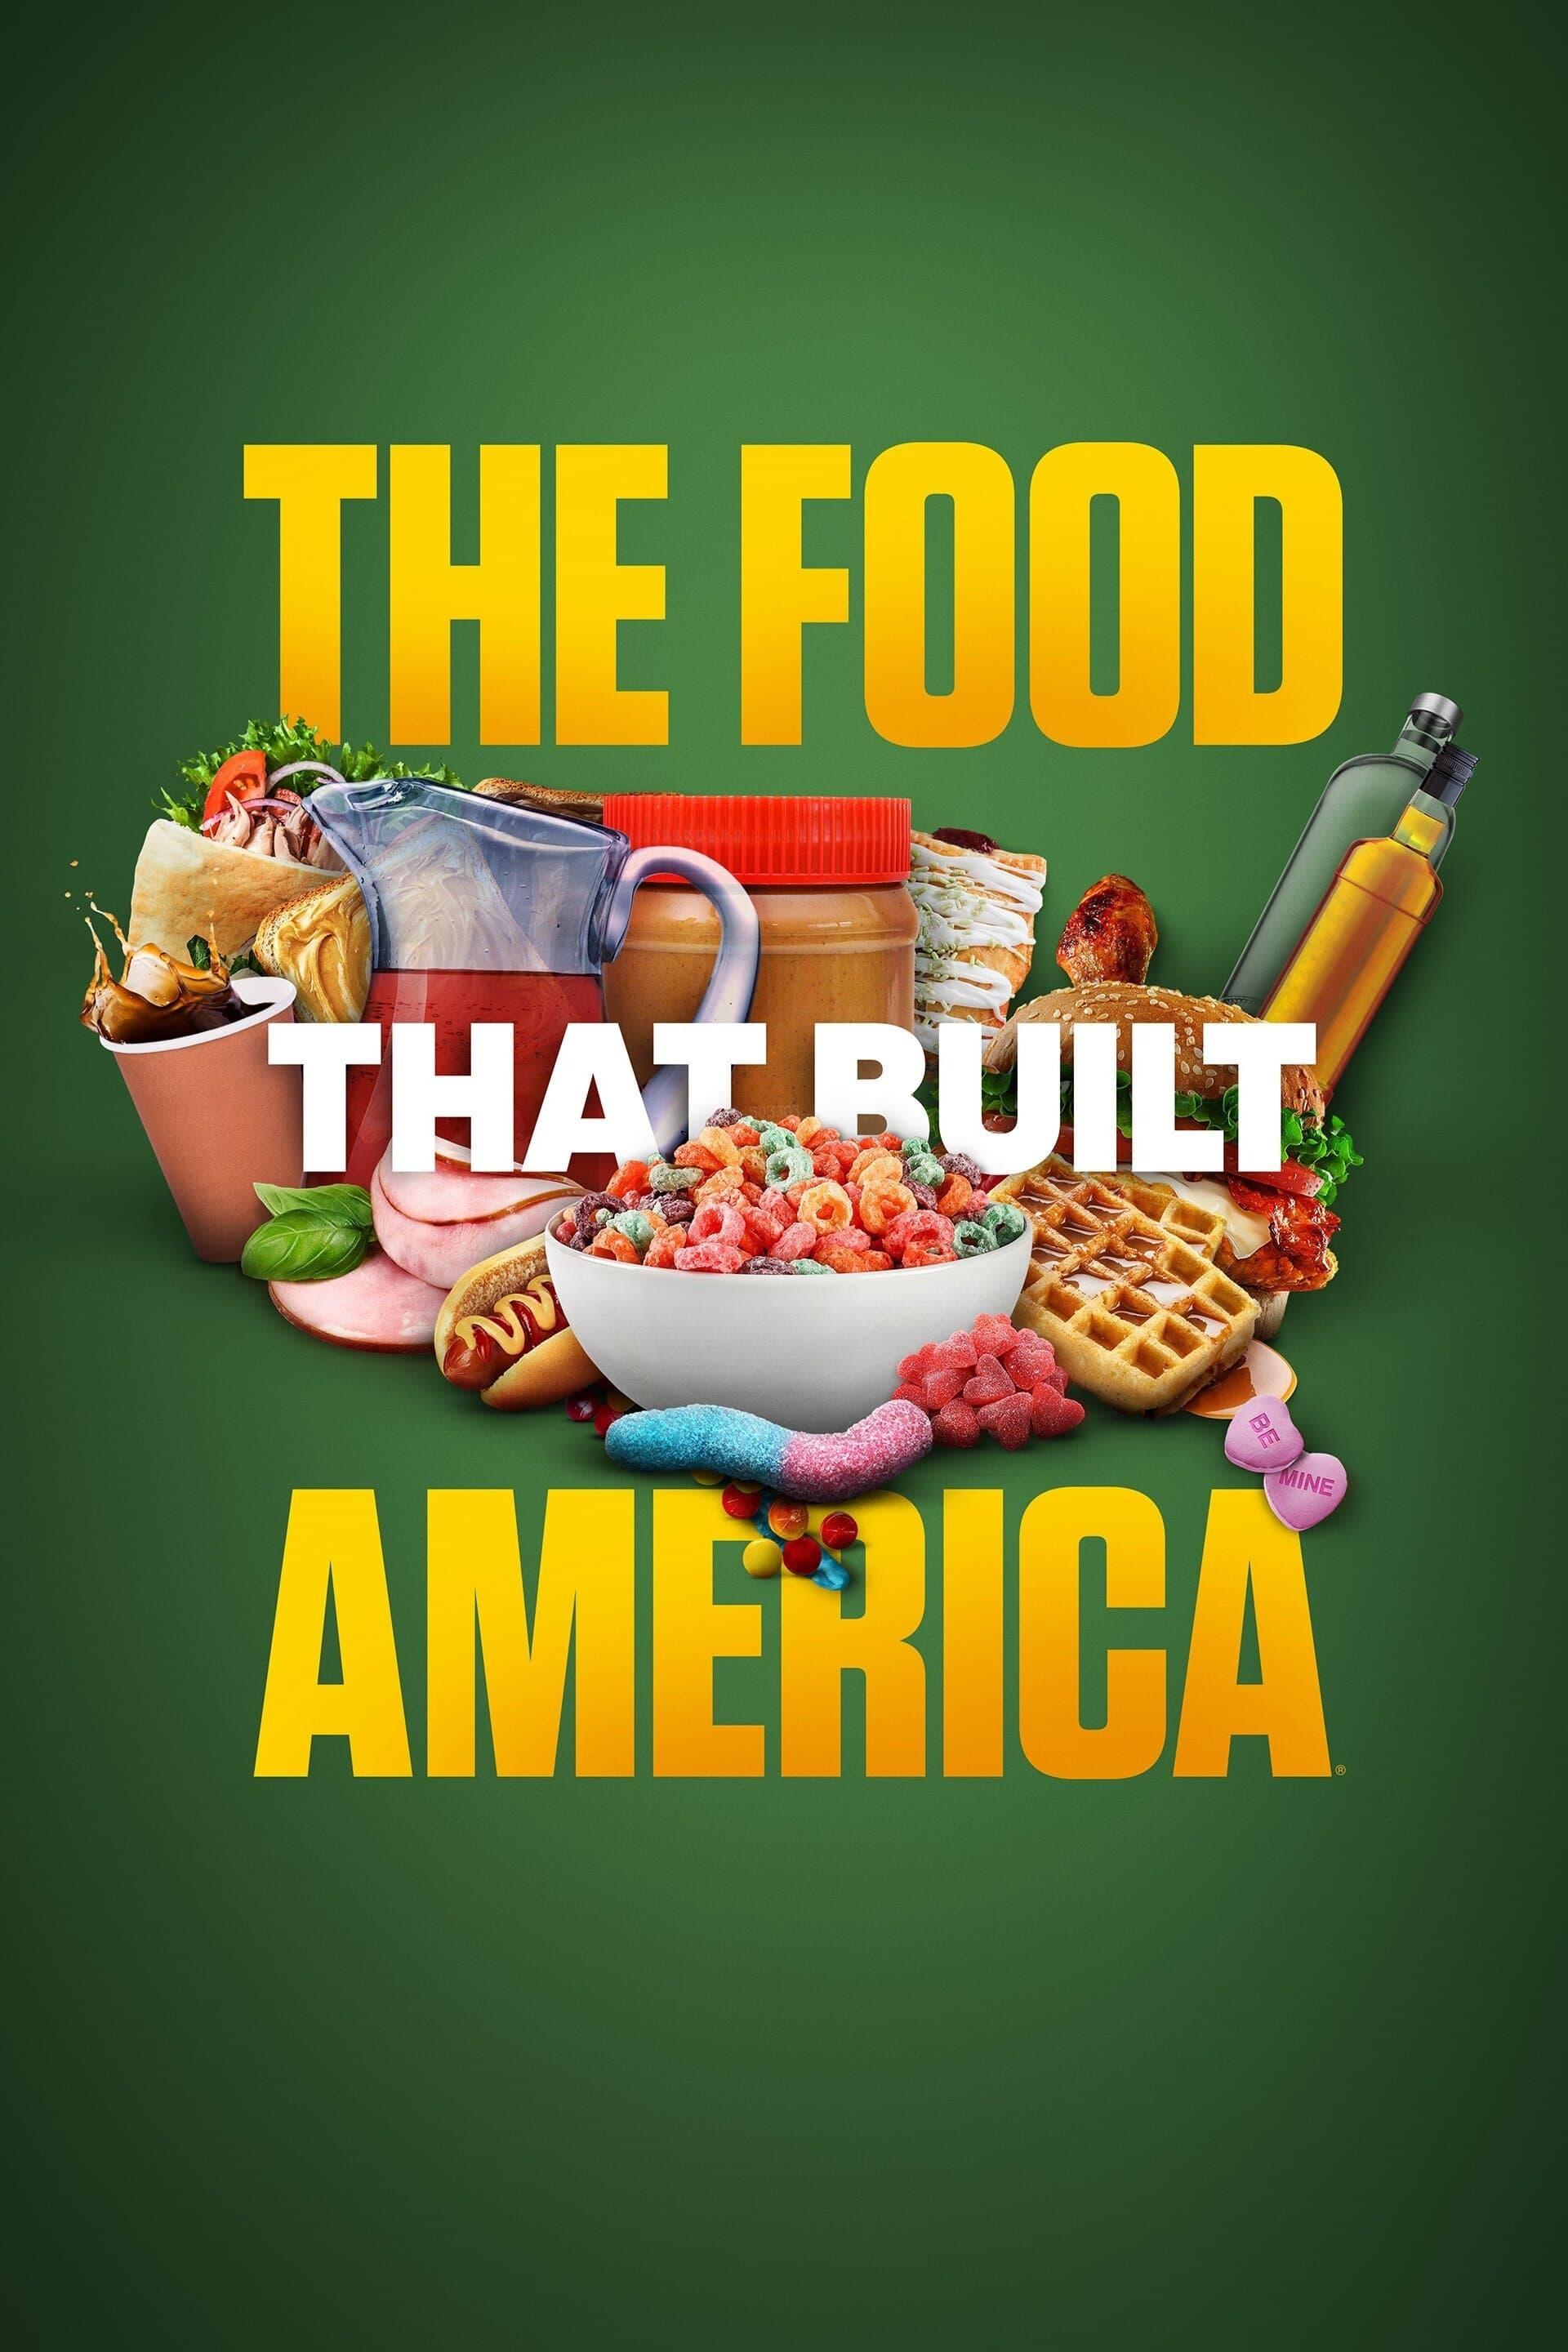 The Food That Built America poster